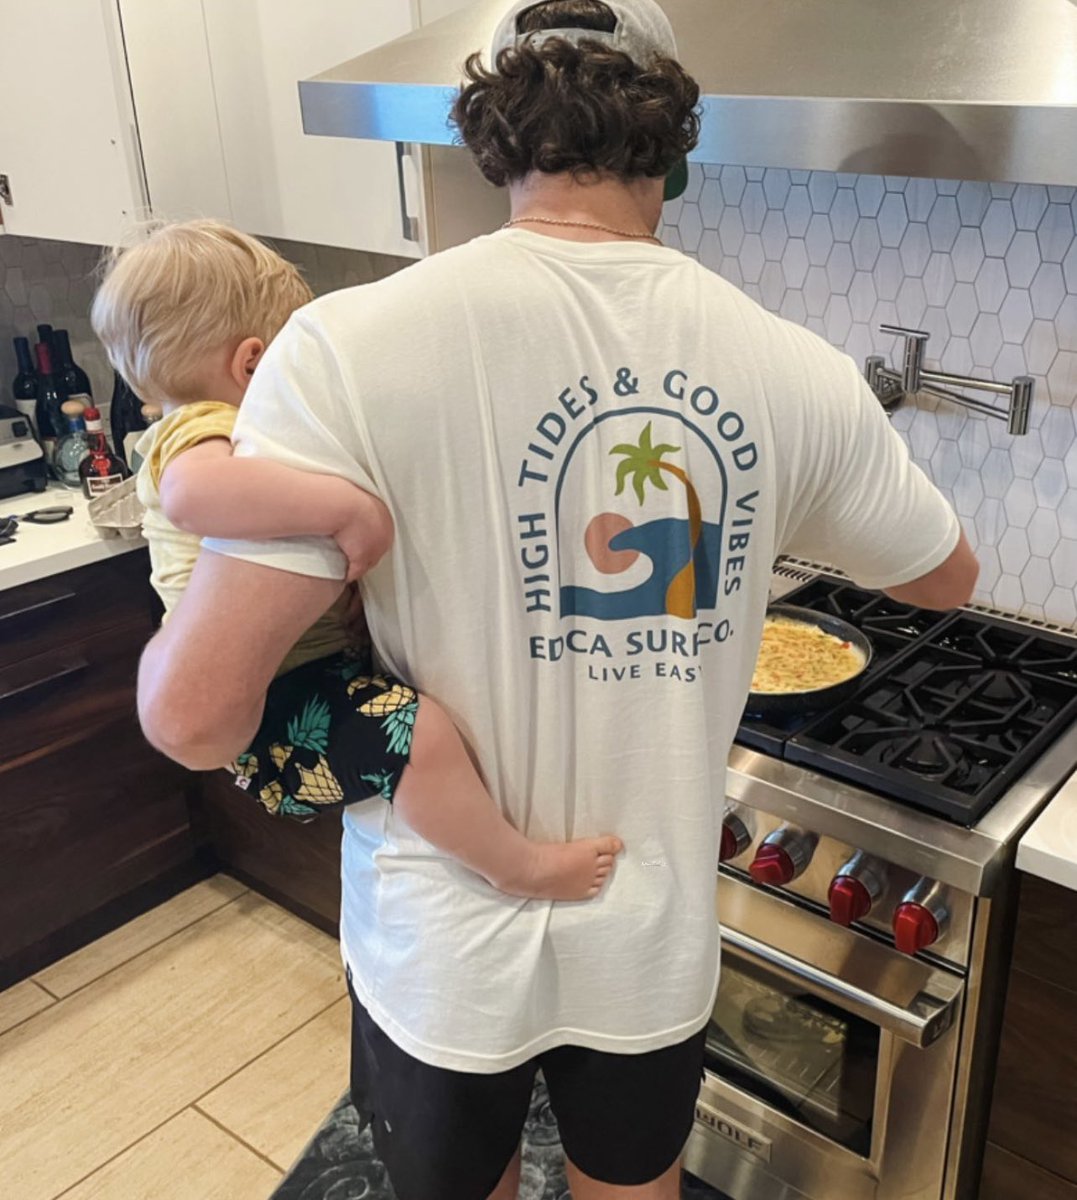 RT @TalkinYanks: Gerrit Cole going baby in one arm while cooking with the other is such a power move https://t.co/UNKLoKtg11